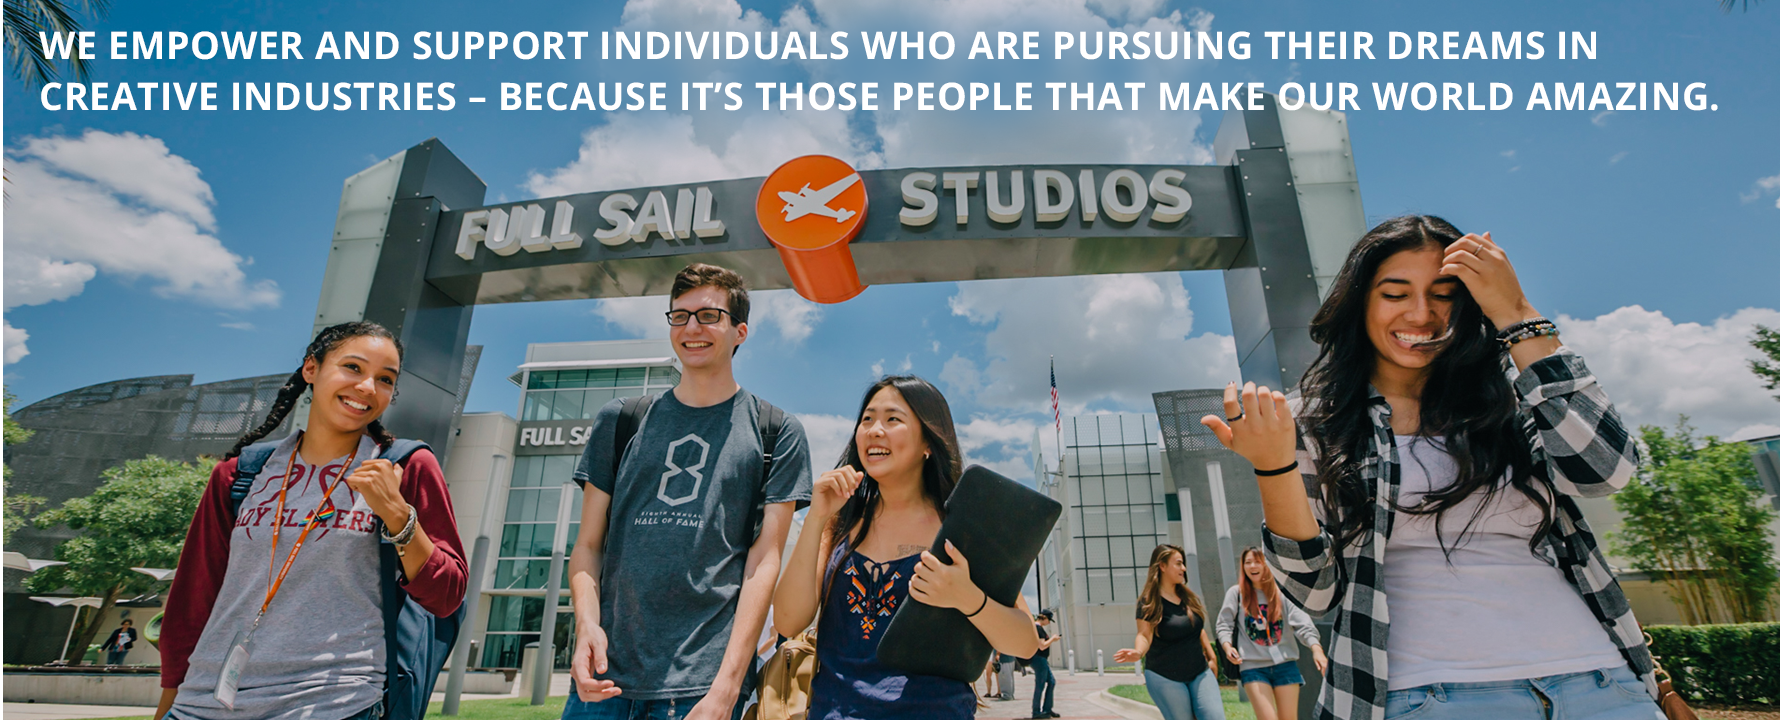 We empower and support individuals who are pursuing their dreams in creative industries - because it's those people that make our world amazing.